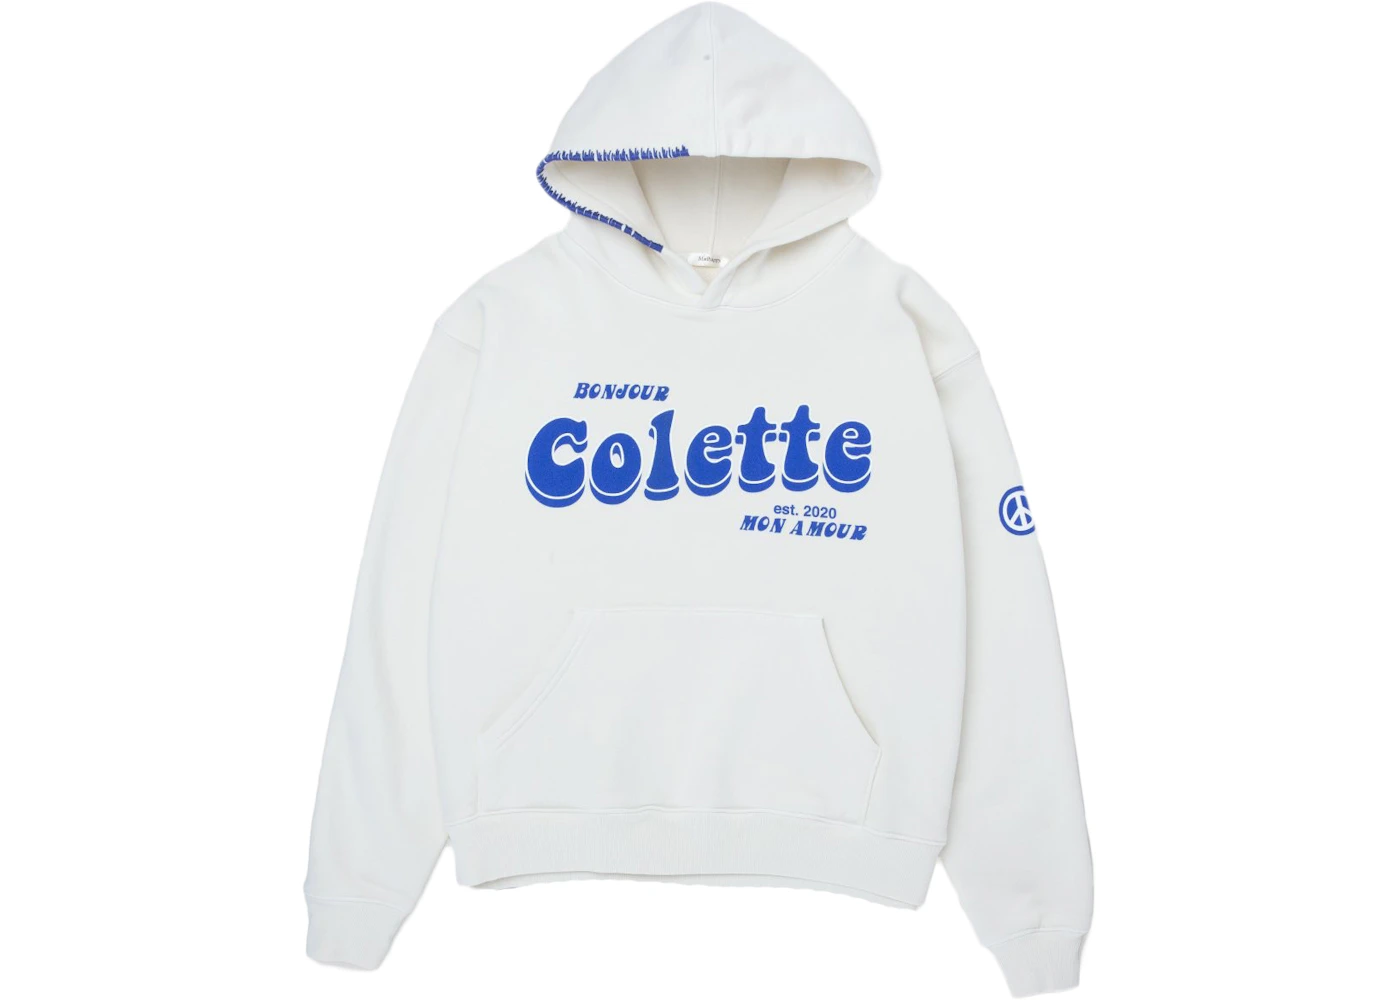 Colette Mon Amour x Madhappy Hoodie White - SS20 Homme - FR